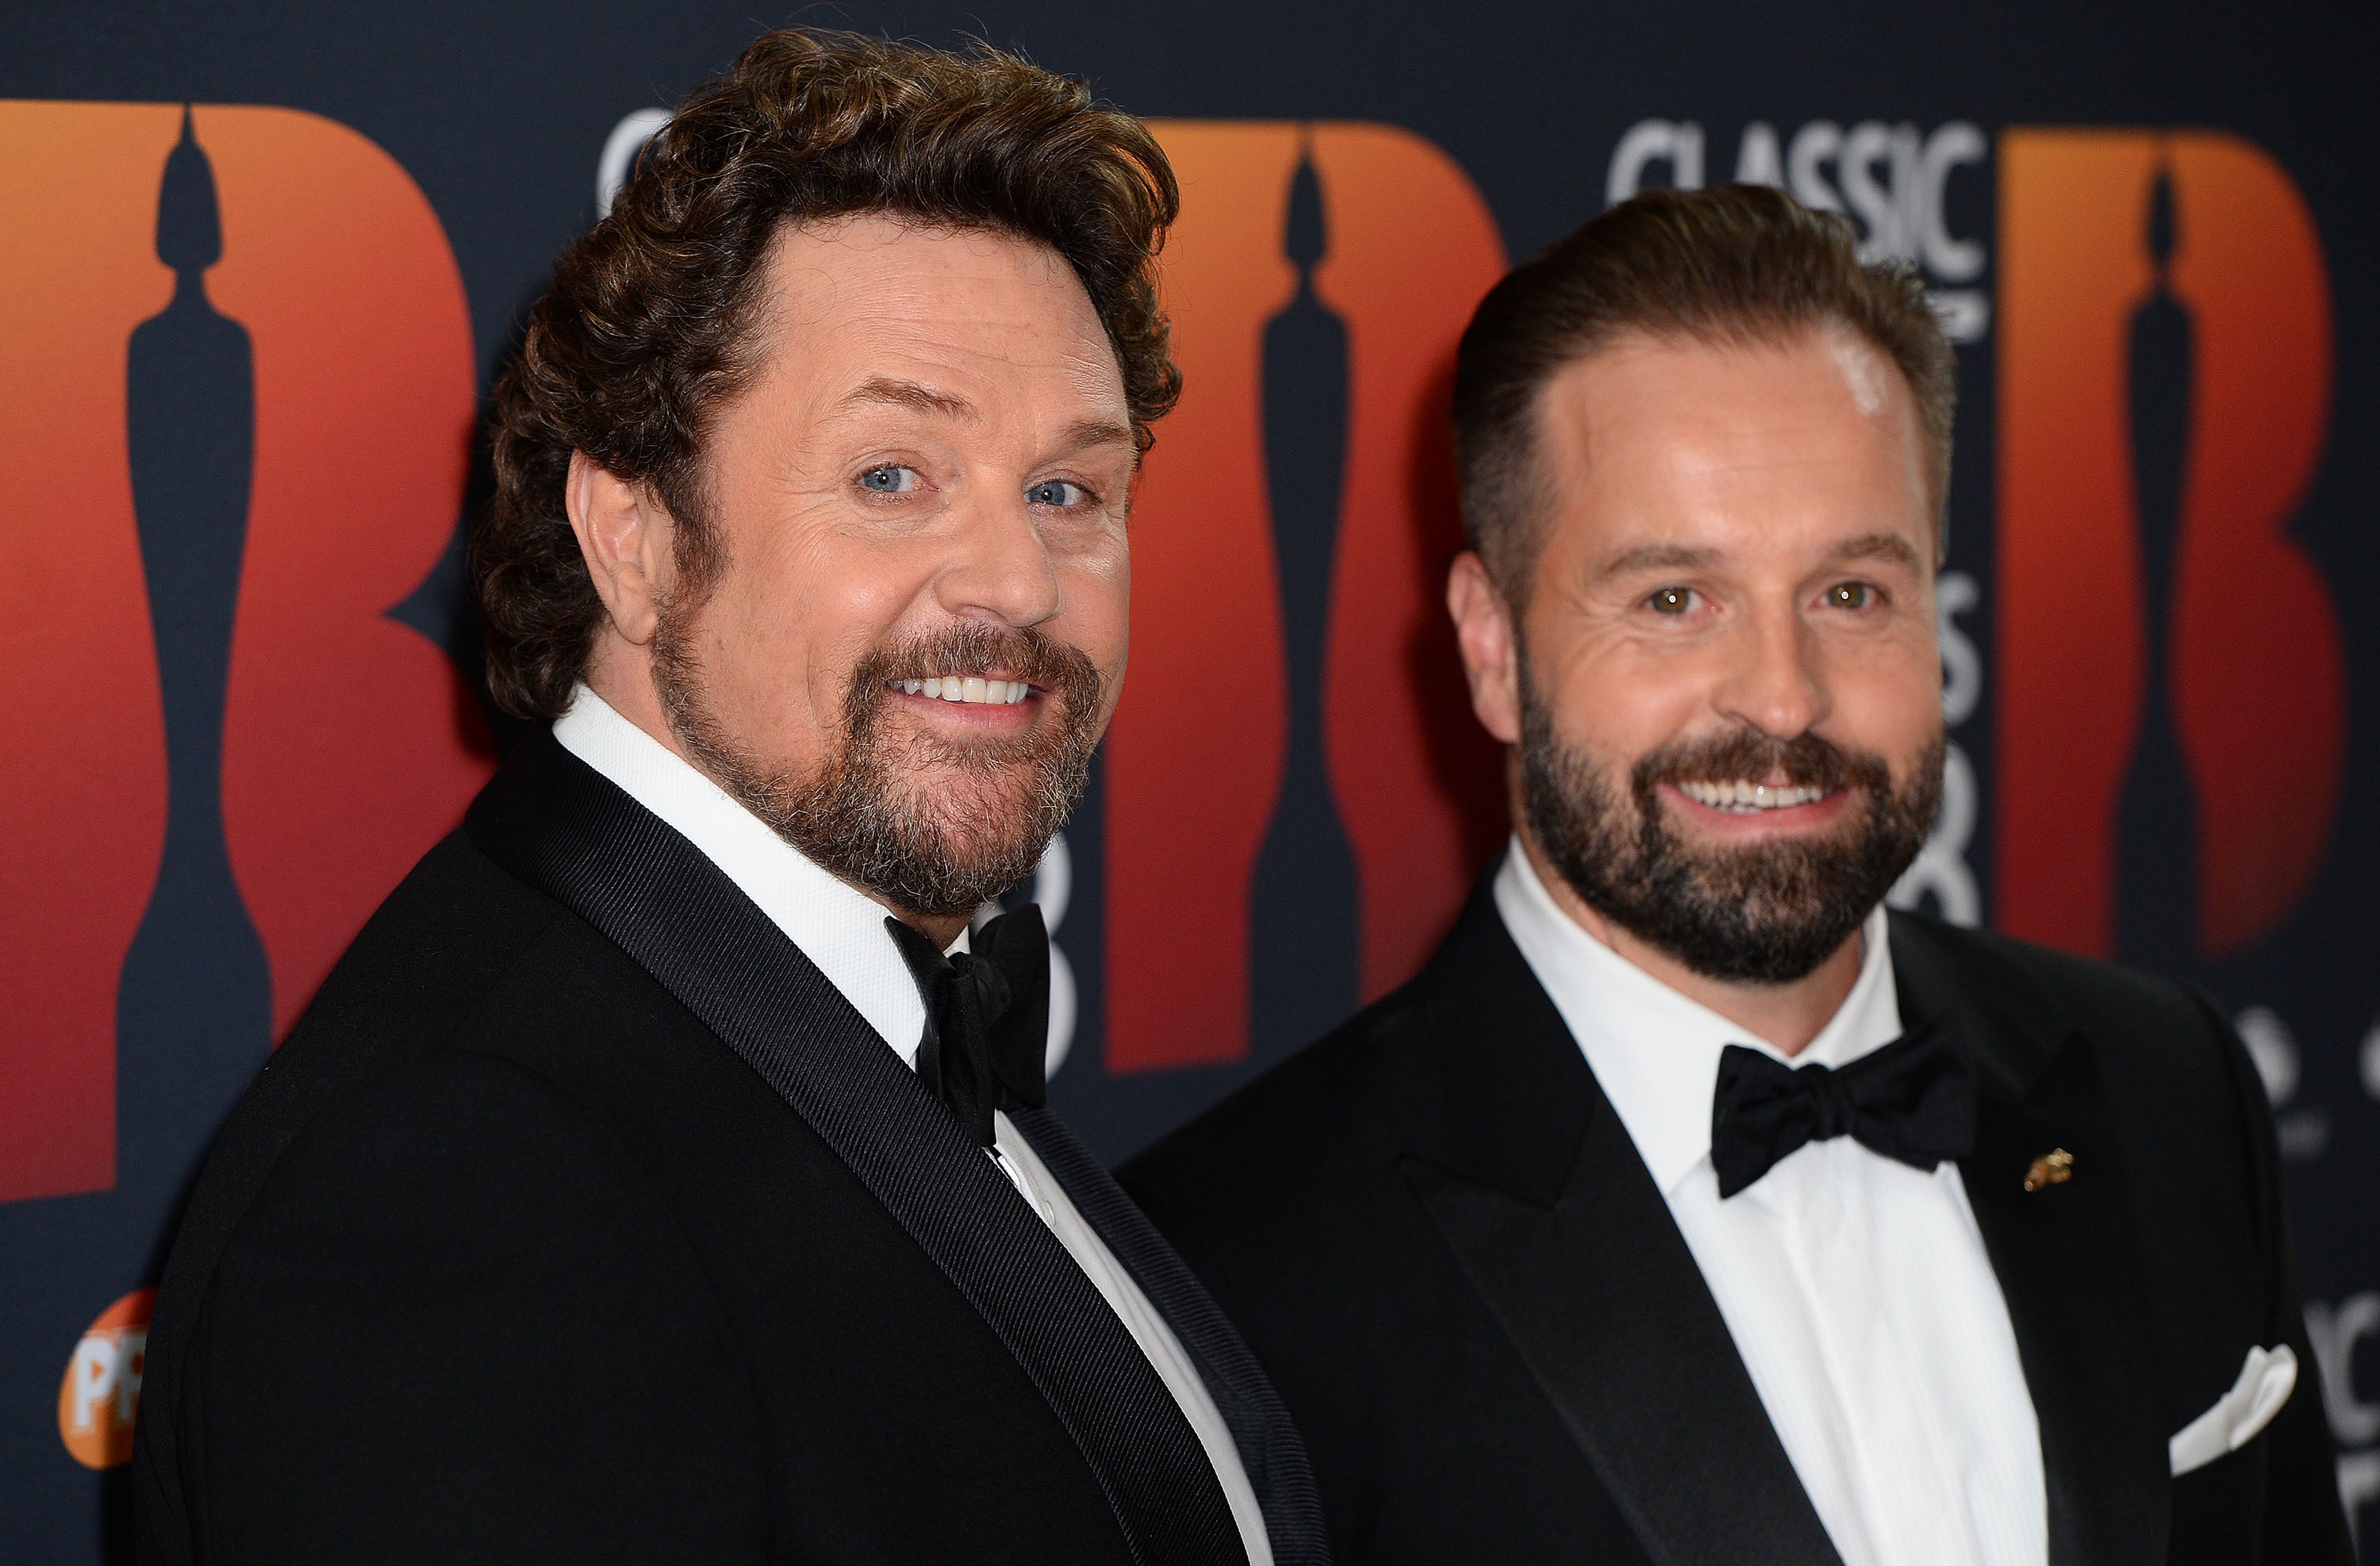 Michael Ball with his longtime singing partner, Alfie Boe